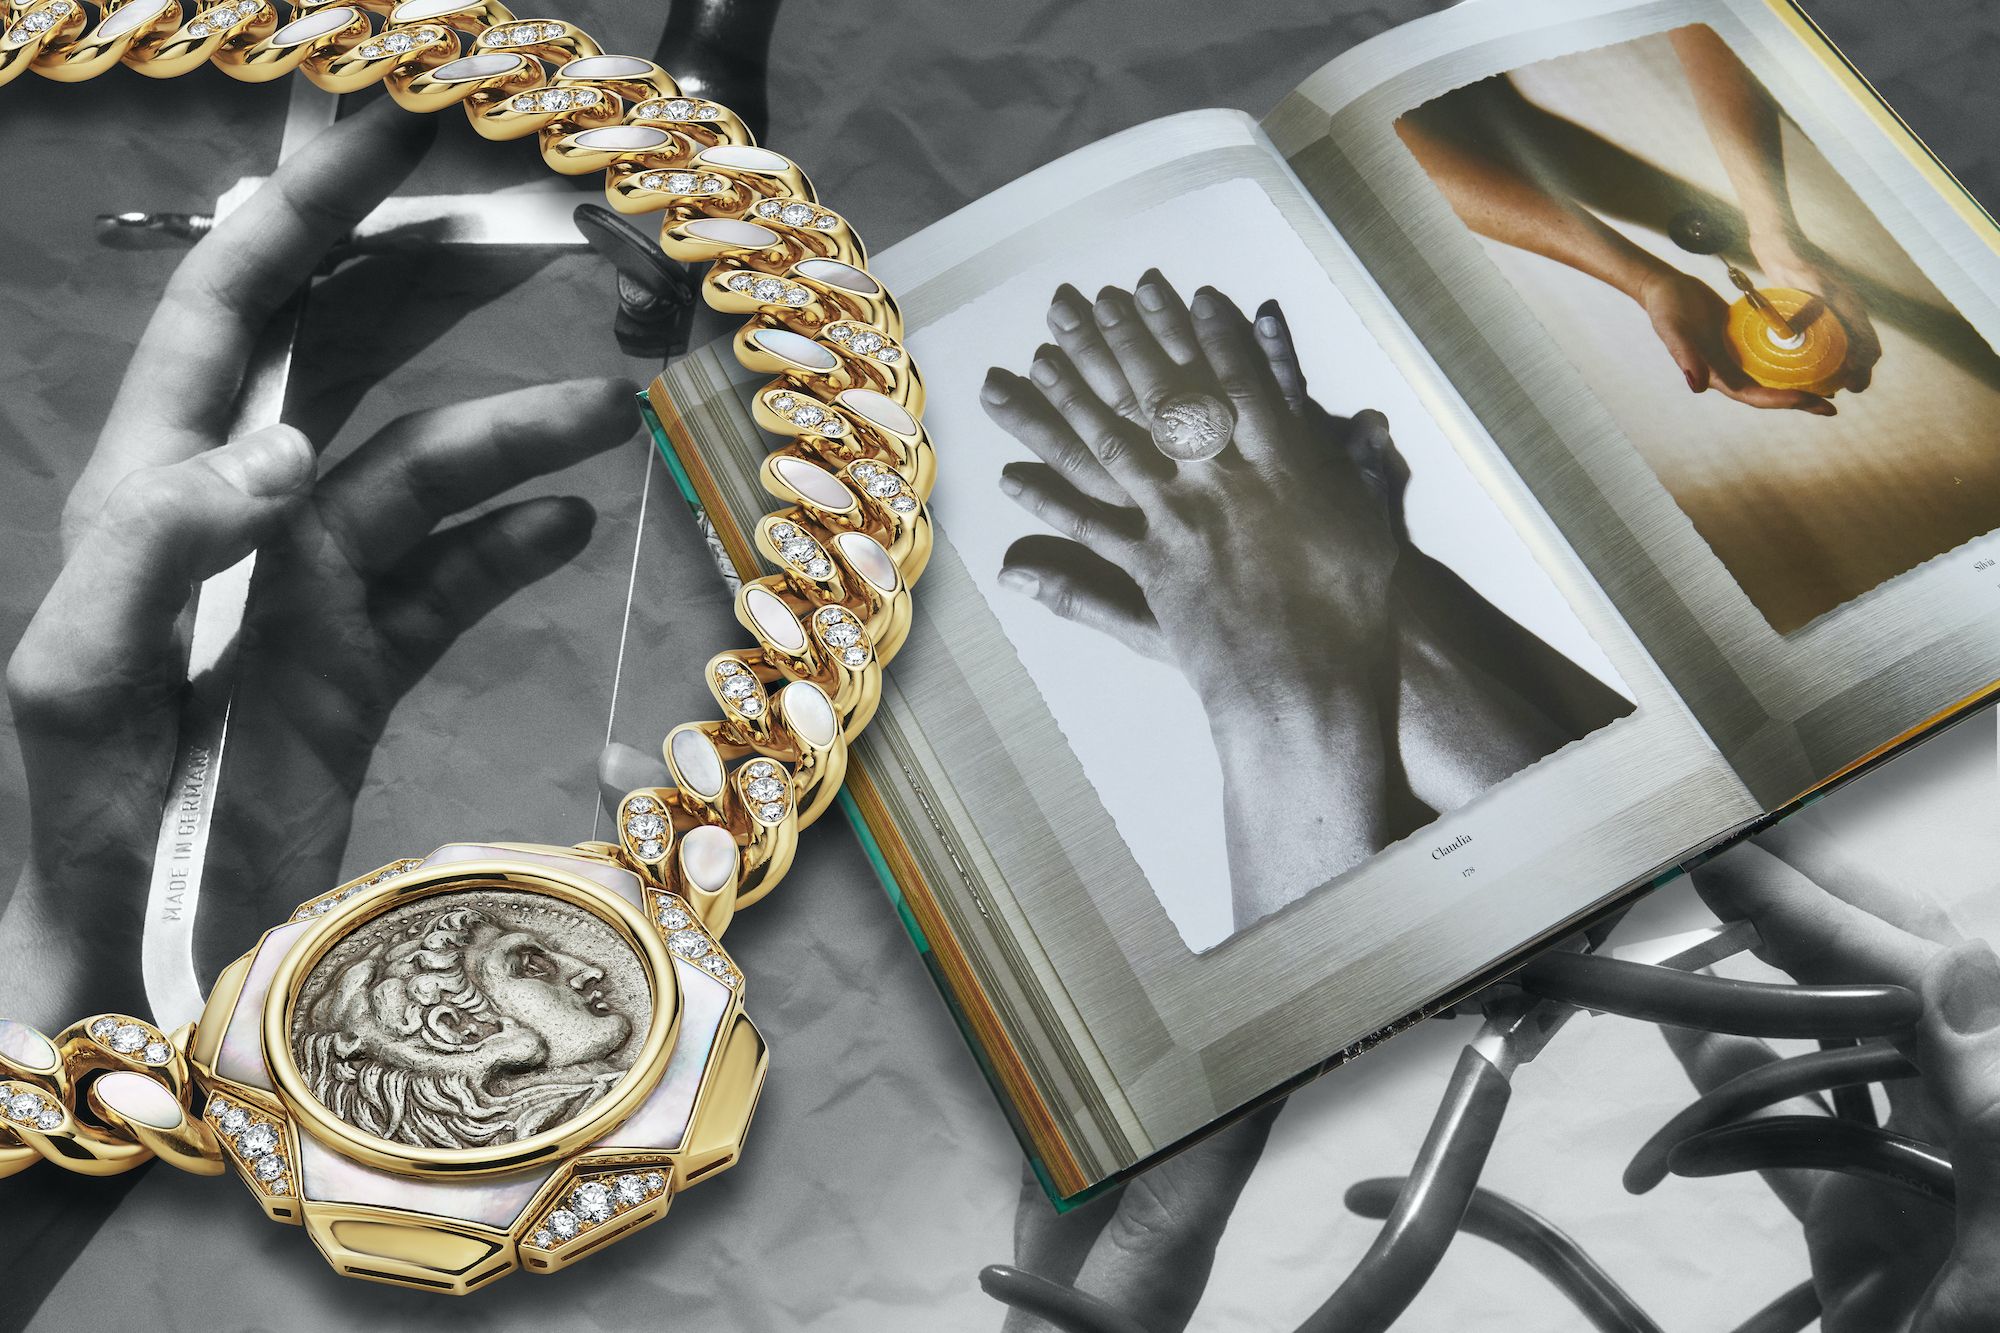 Bulgari - Set to revolutionise your style. Recreated for a